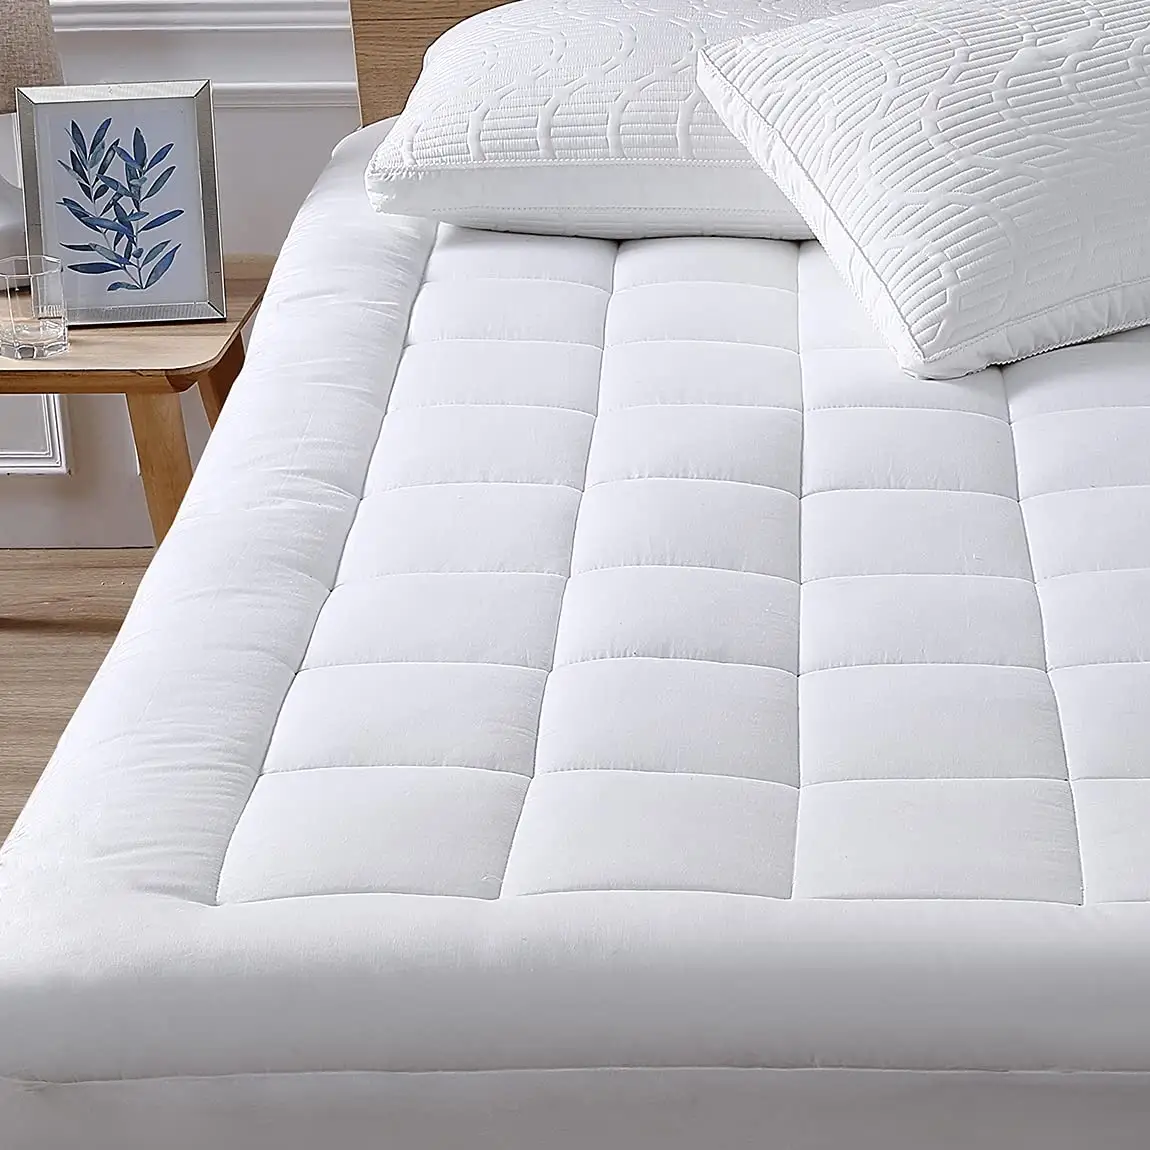 2022 new supersoft comfortable fluffy customized size quilt 100 cotton velvet white oversized luxury mattress pad